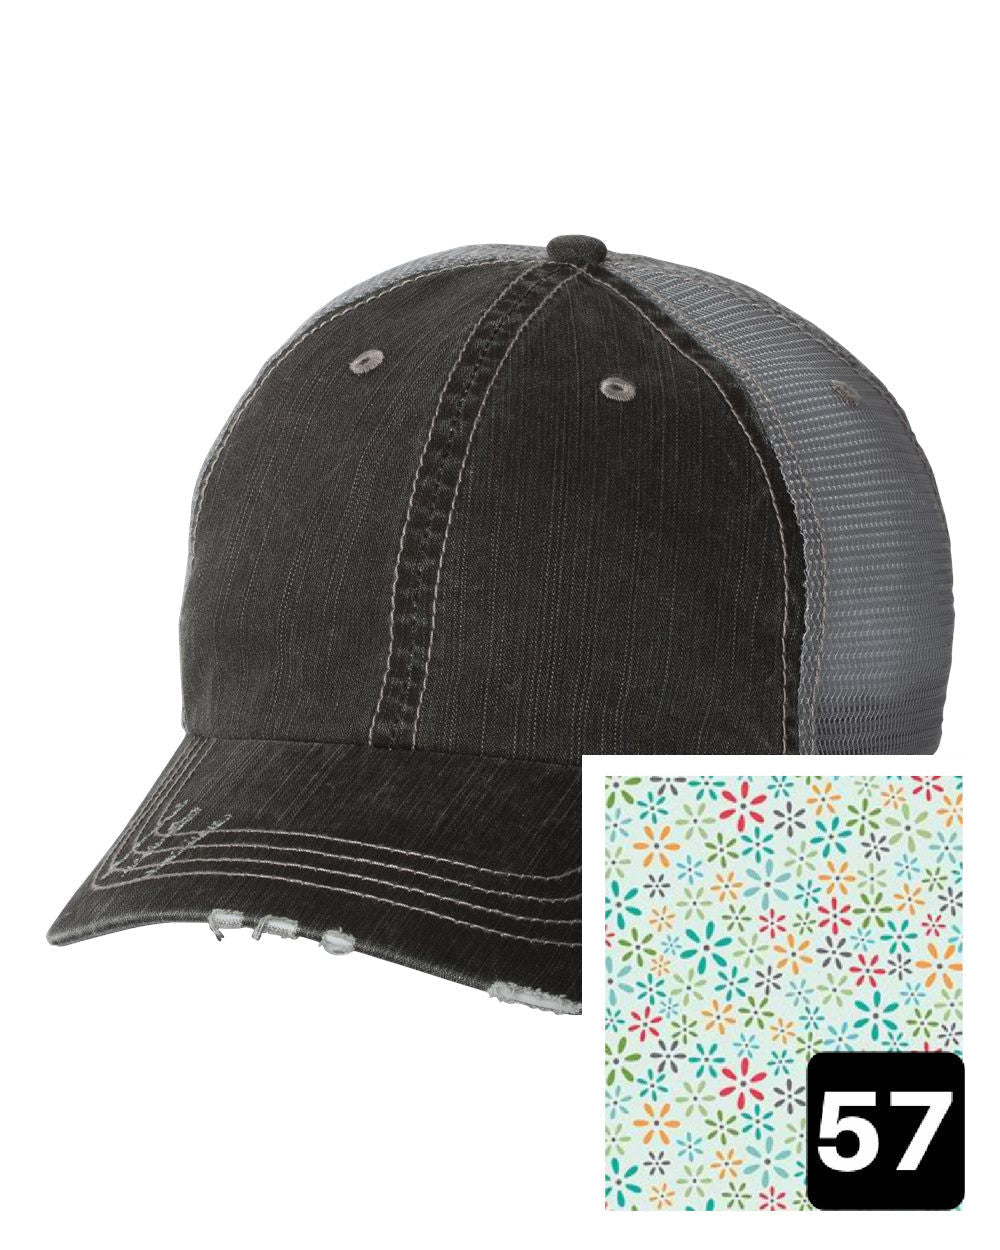 gray distressed trucker hat with white daisy on yellow fabric state of New York